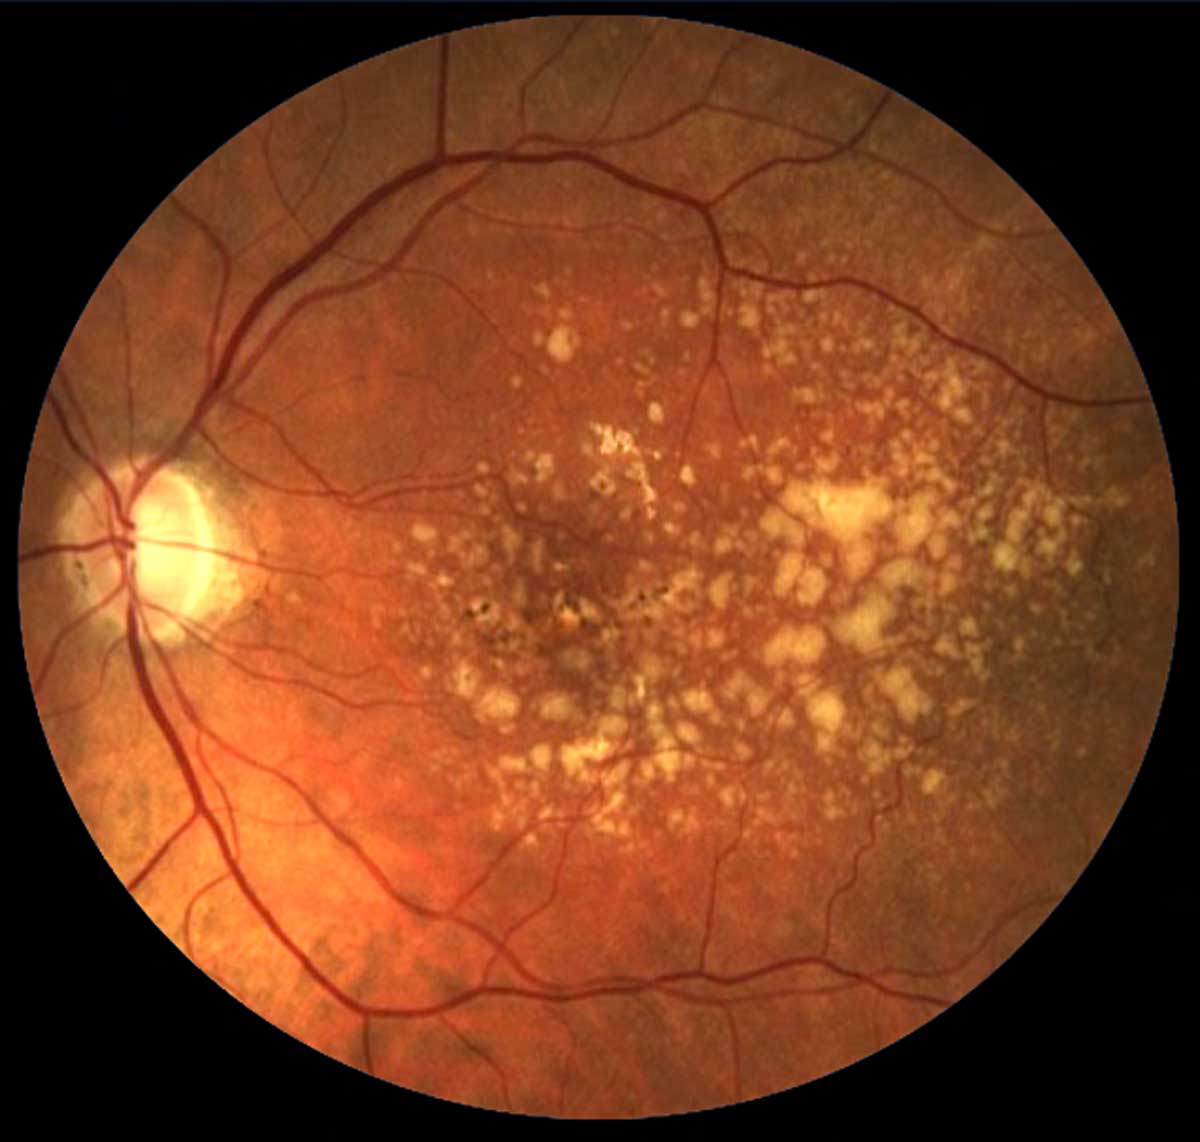 In cases of concurrent amblyopia and AMD, research shows that the amblyopic eye is typically less affected by AMD, though the mechanism behind this observation is unclear. 